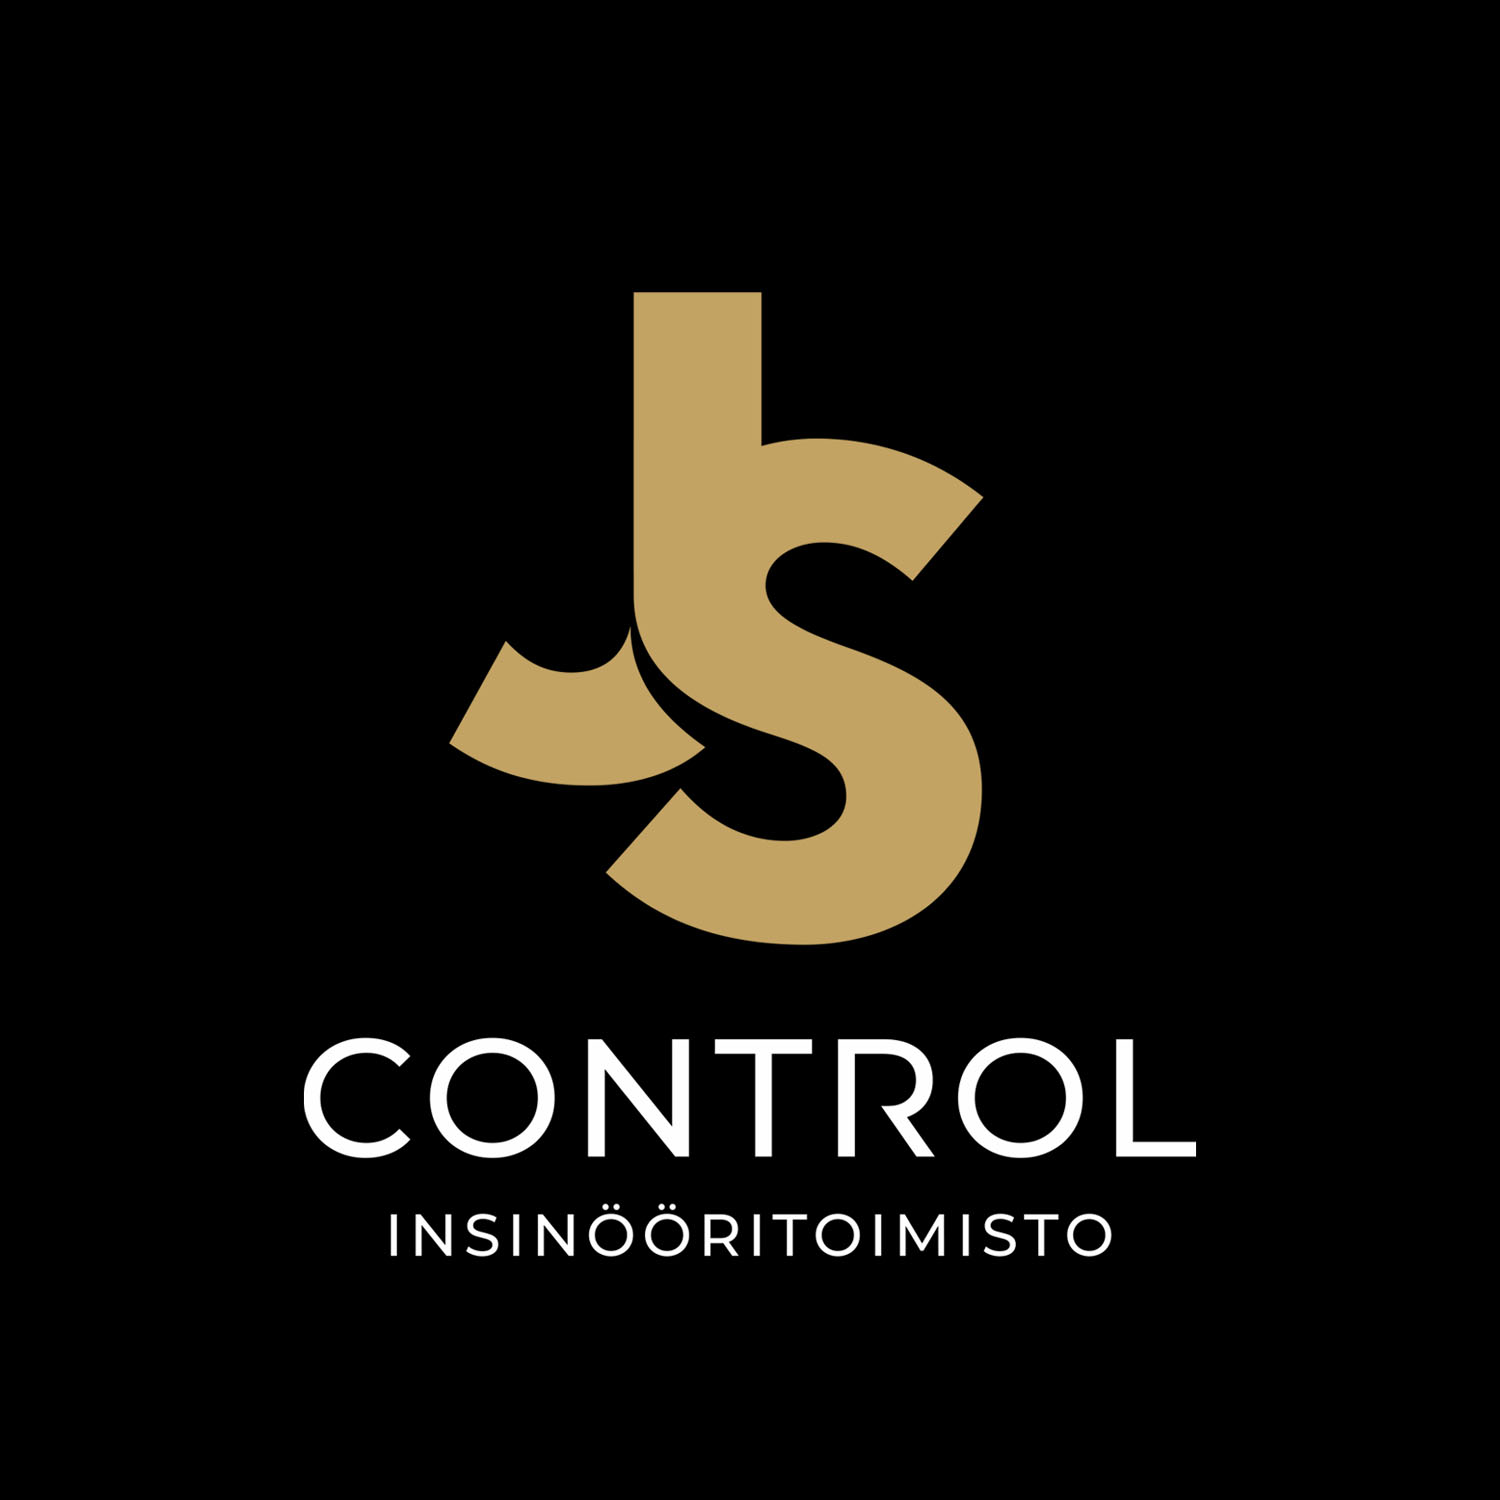 Logo, JS Control, made by Therwiz Design